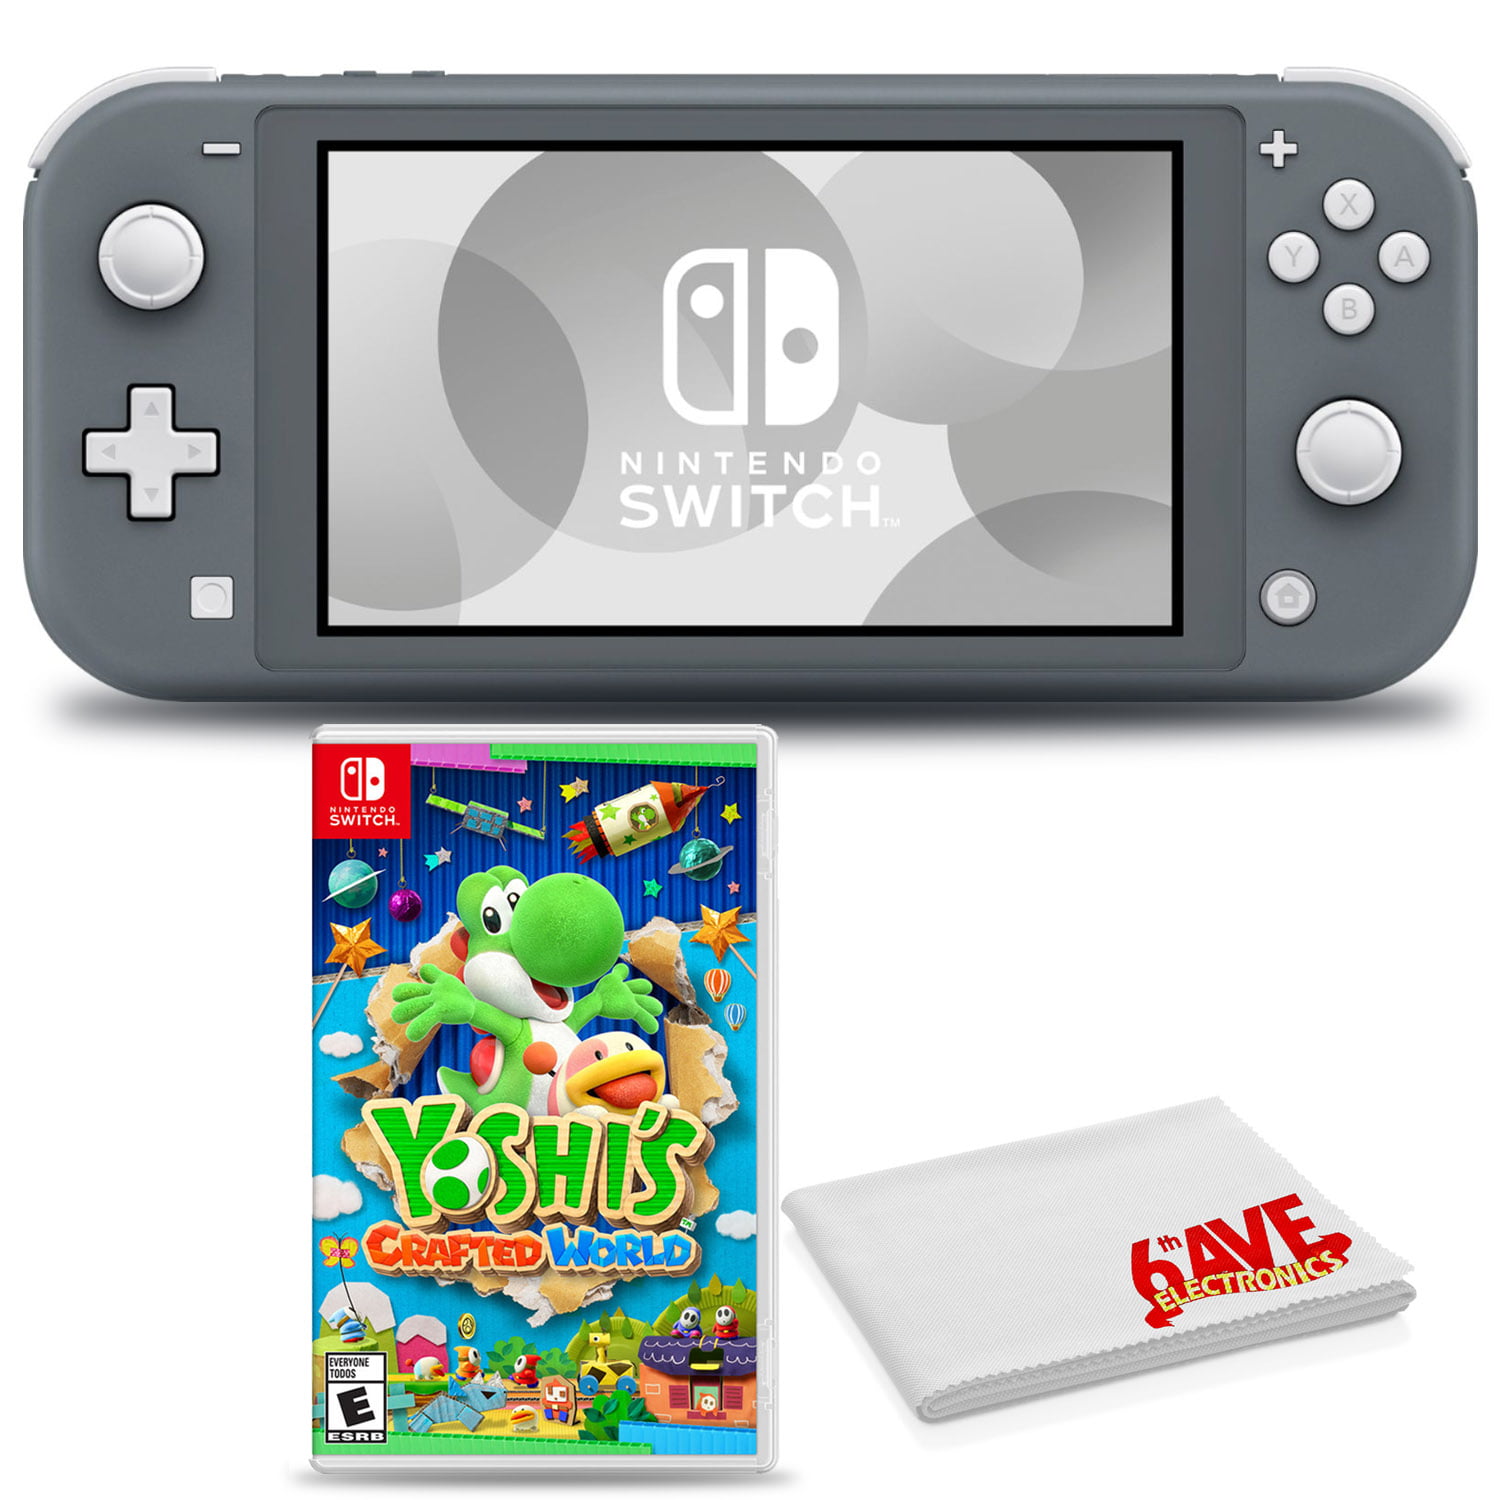 Nintendo Switch Lite (Blue) Gaming Console Bundle with Yoshi's